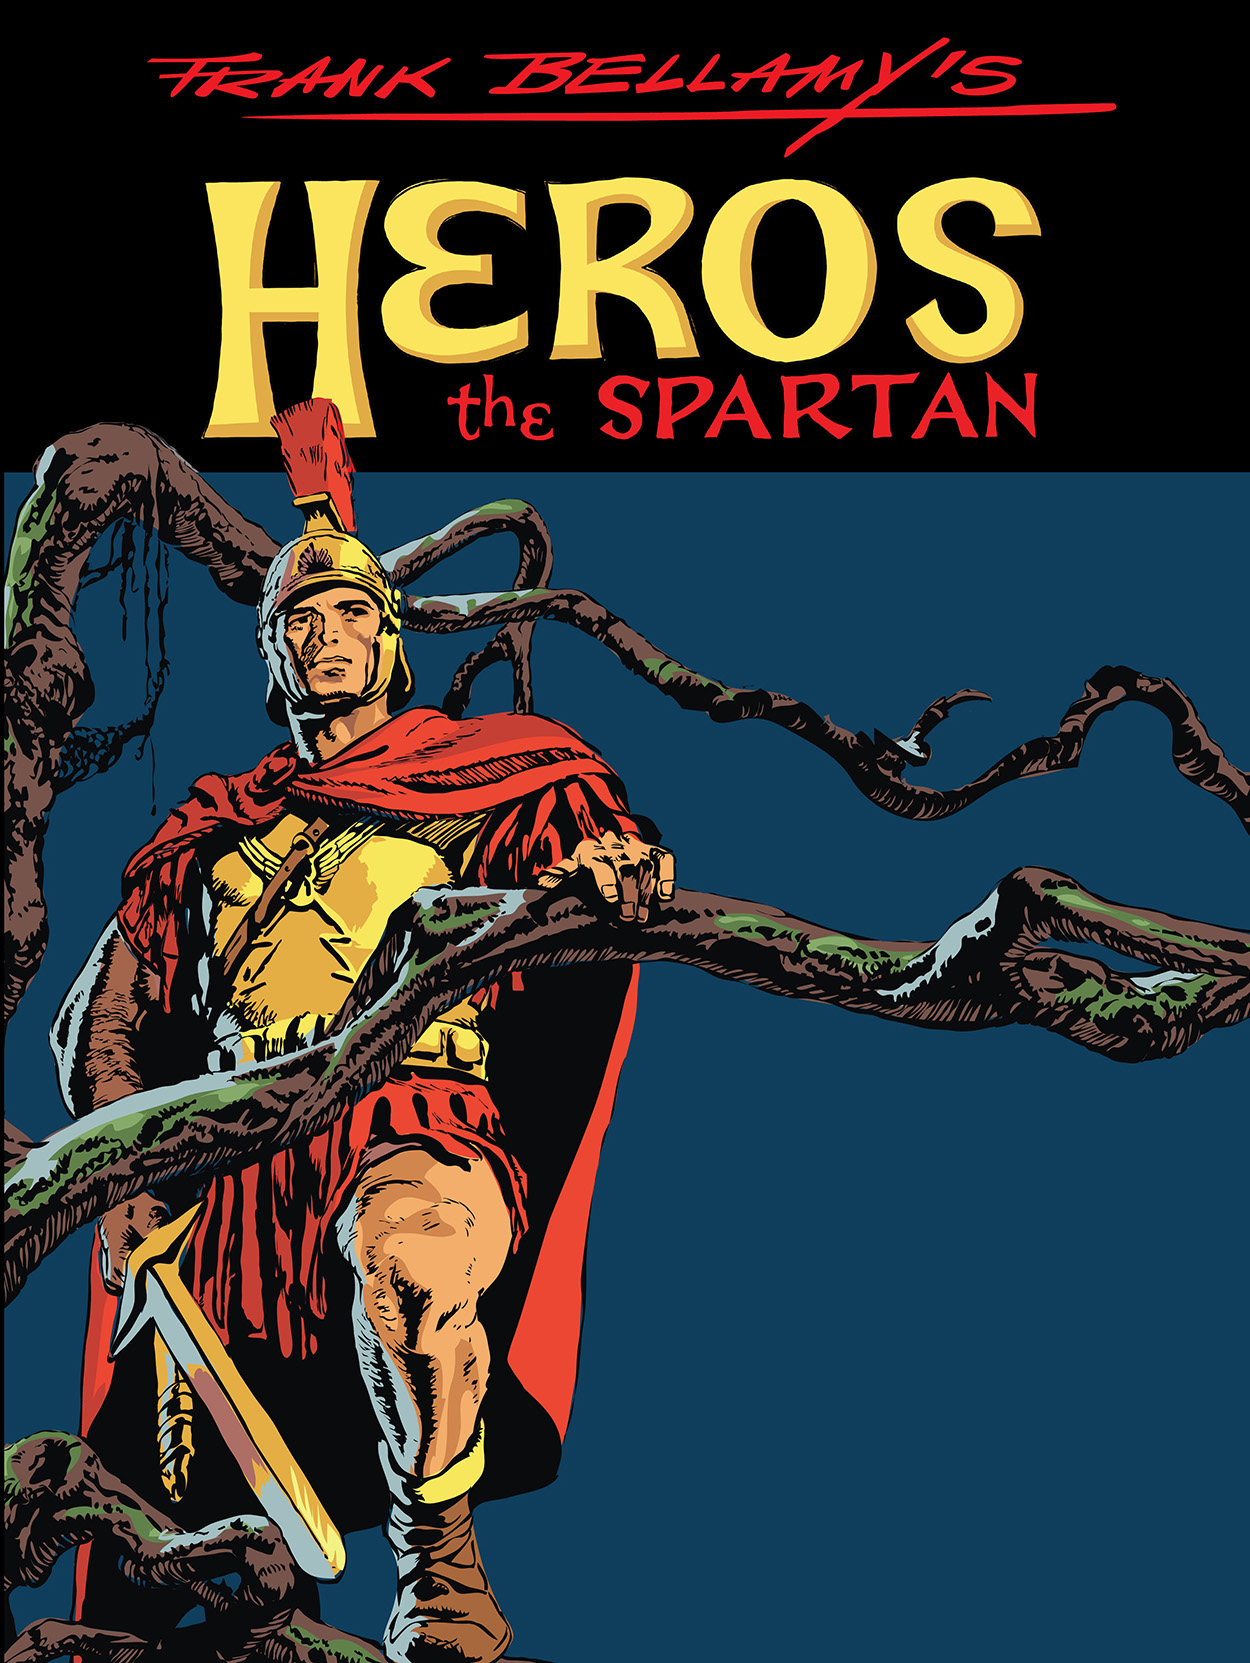 Frank Bellamy's Heros the Spartan The Complete Adventures (Limited Edition)